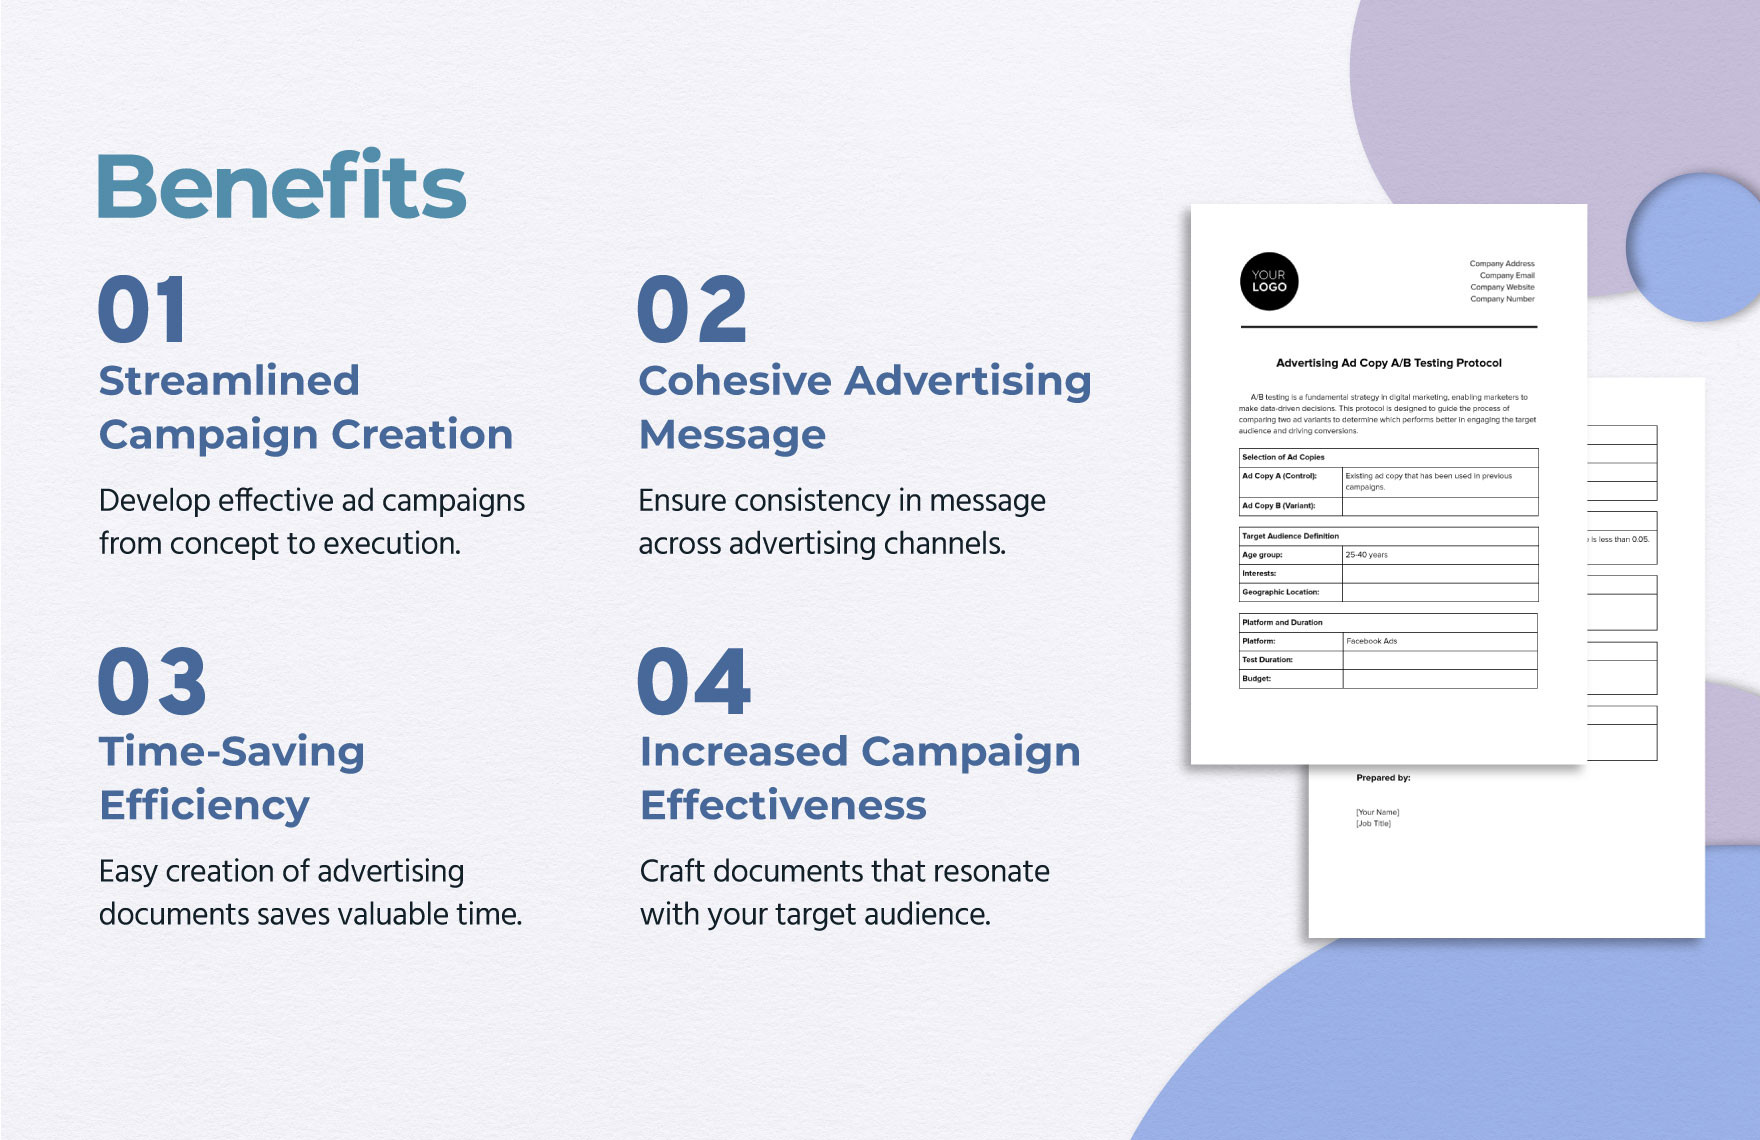 Advertising Ad Copy A/B Testing Protocol Template